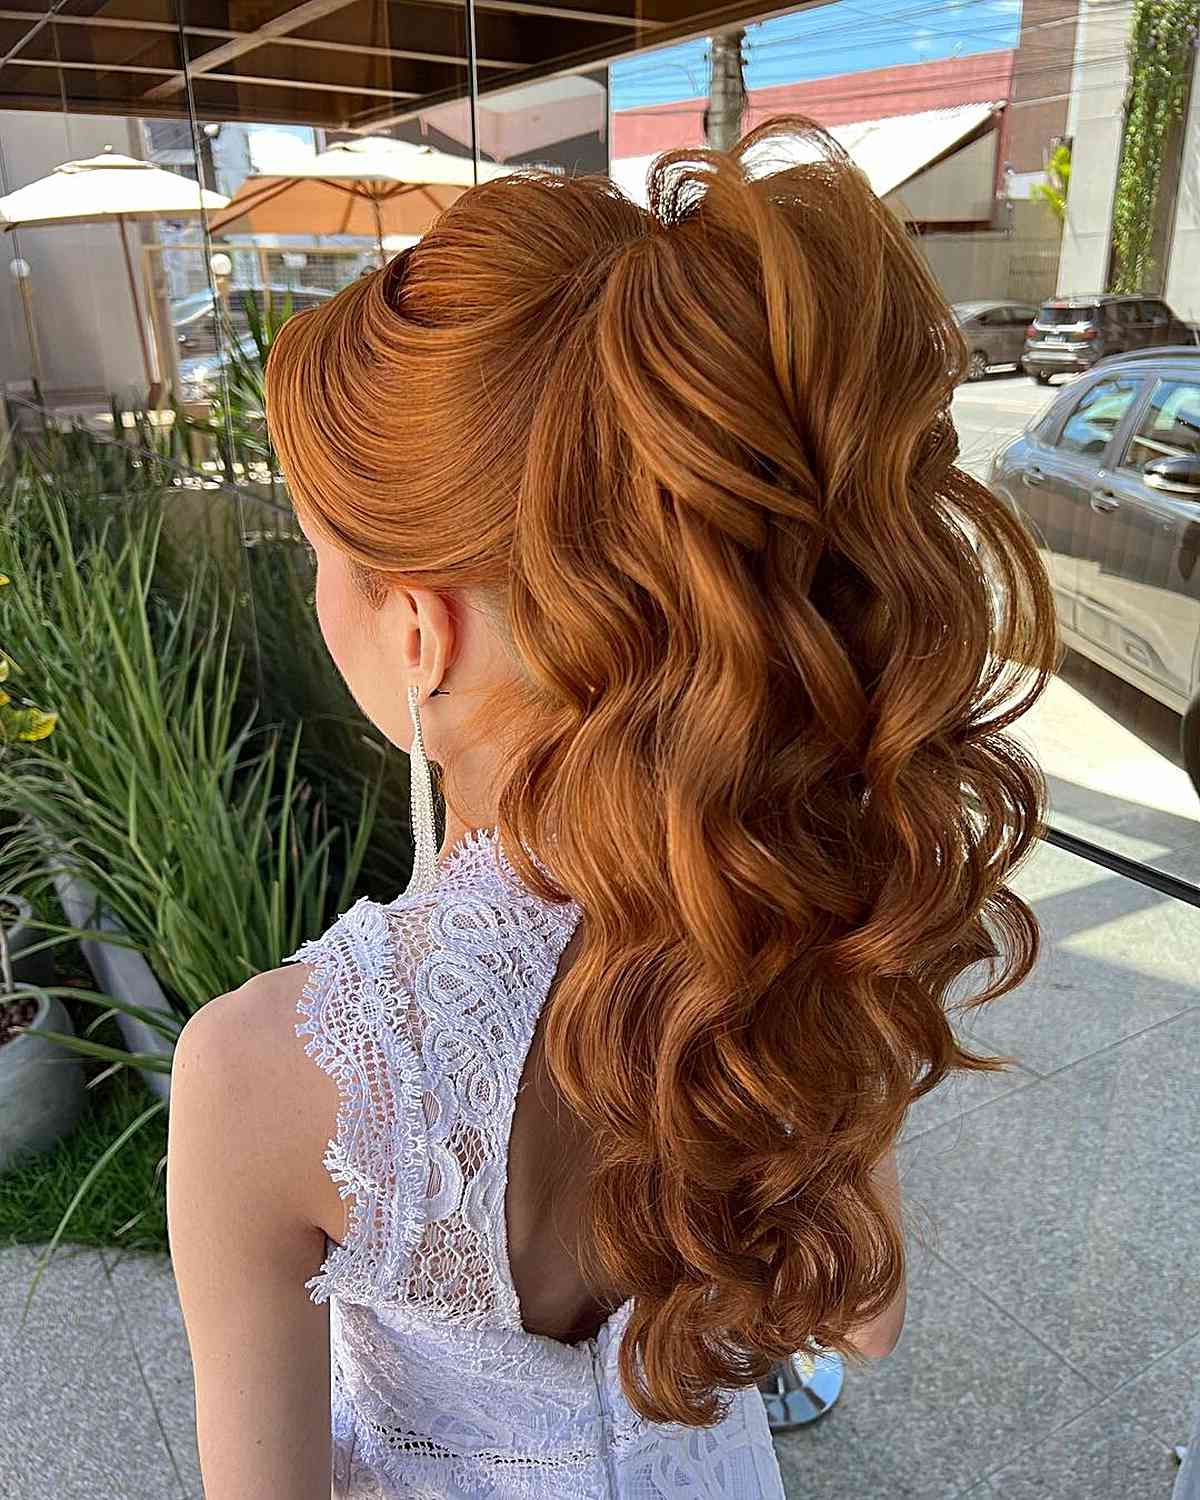 35 Gorgeous Bridesmaid Hairstyles For The Brides Big Day Regarding Bridesmaid’s Updo For Long Hair (Photo 18 of 25)